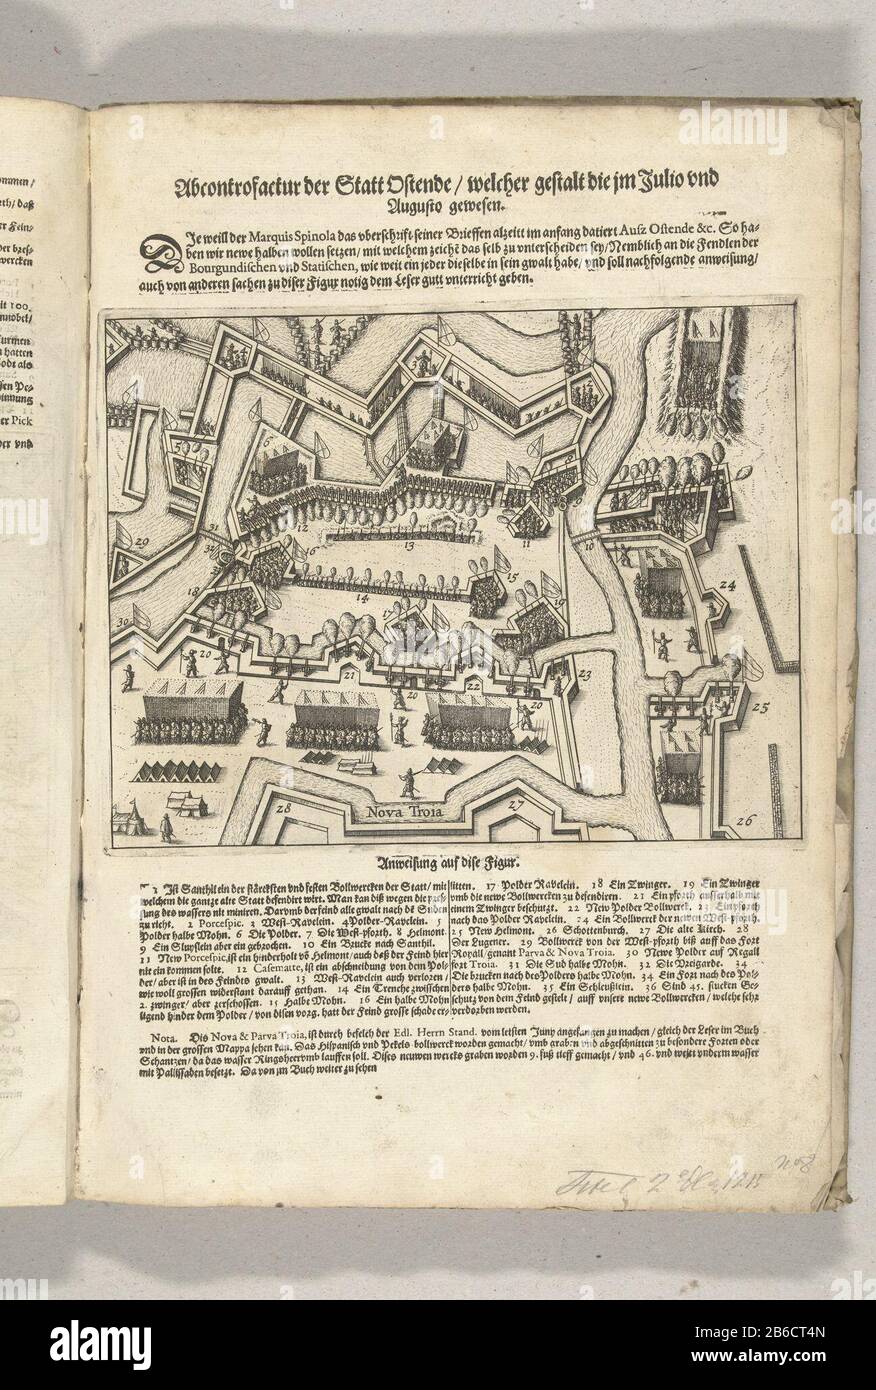 Siege of Ostend the cutoffs and the New Troy, 1604 Abcontrofactur der Statt Ostende welcher Gestalt und im Julio Augusto gewesen (title object) Siege of Ostend: the cutoffs and the New Troy, the situation in July-August 1604. Up to the print title, underneath the description in German. Part of the illustrations, a journal of the siege of Ostend 1601-1604. Manufacturer : printmaker: anonymous printmaker: Baptista Doetechum (possible) Place manufacture: Netherlands Date: 1604 Physical features: etching with text printing material: paper Technique: etching / printing sizes: plate edge : h 175 mm Stock Photo